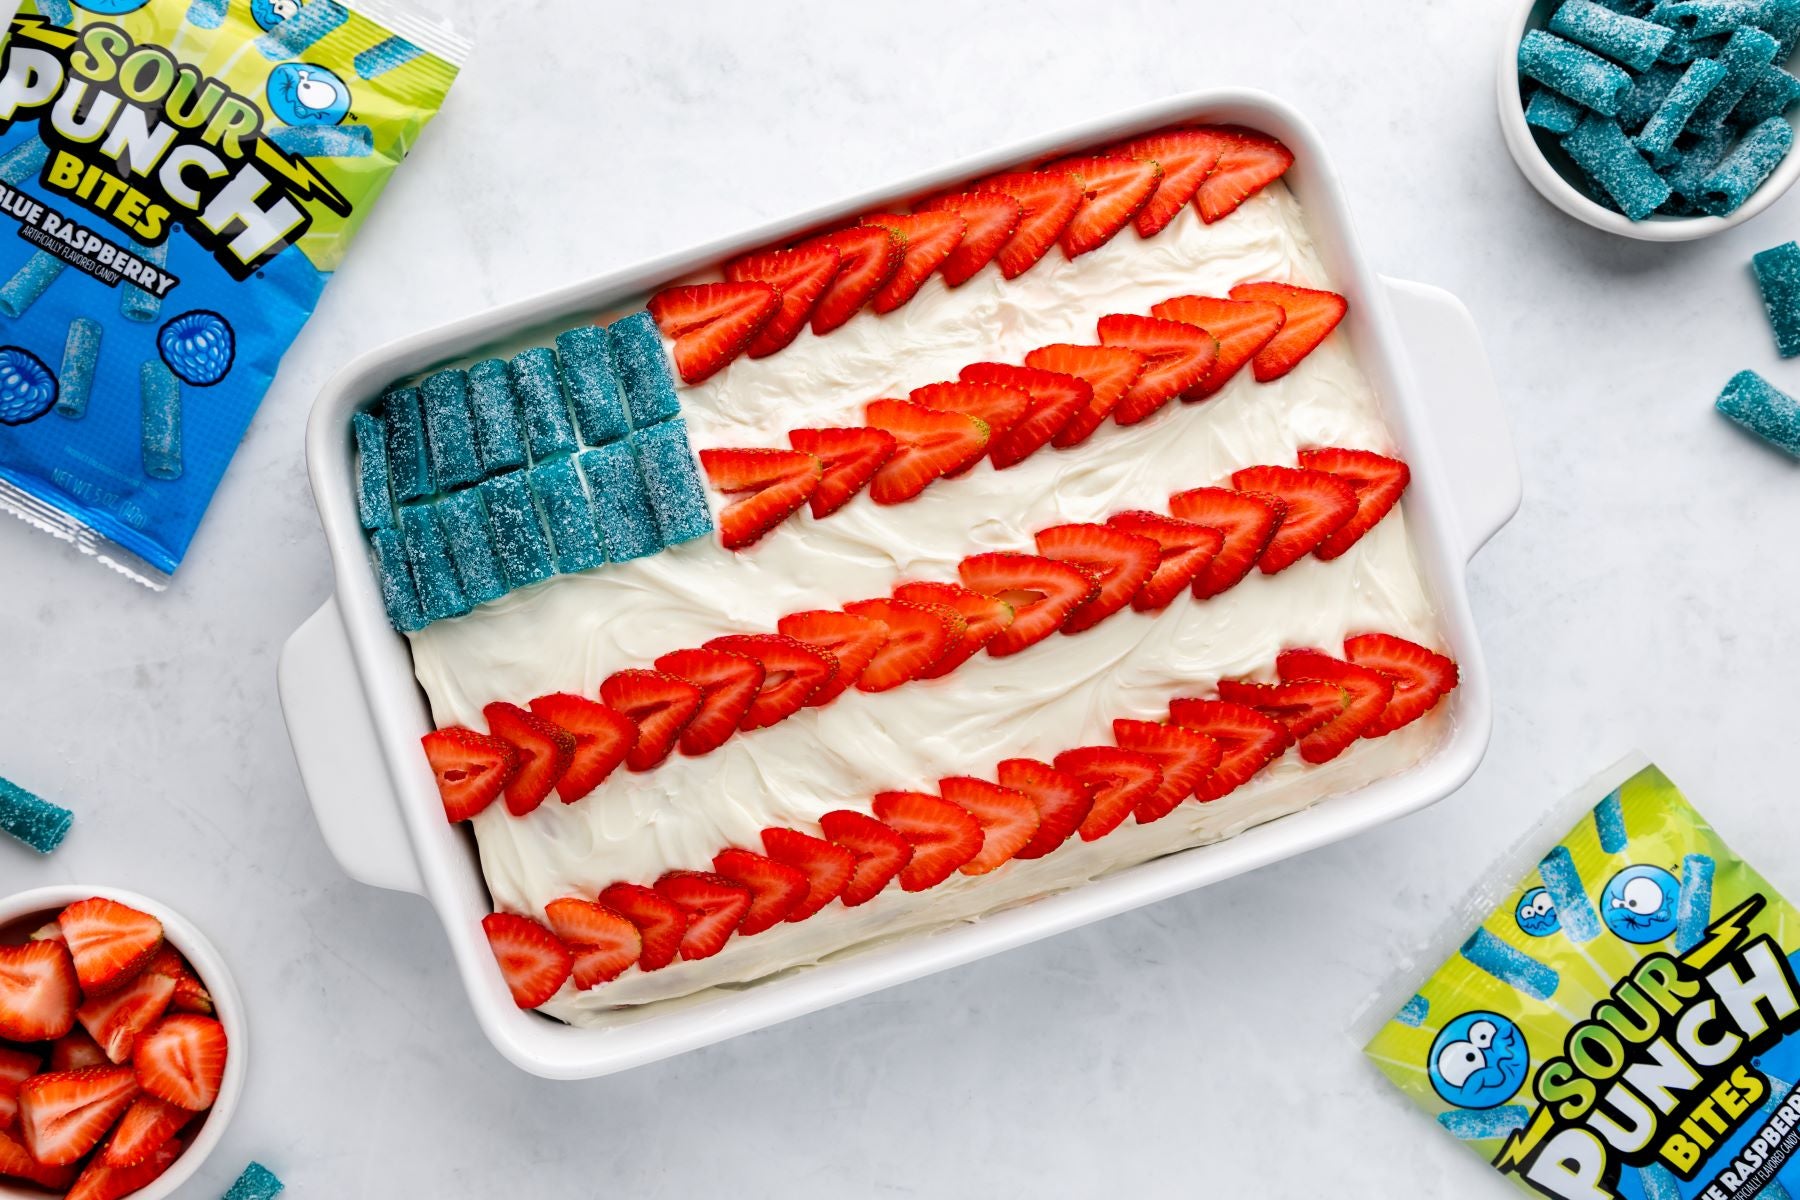 American Flag Cake Recipe with Sour Punch Blue Raspberry Bites Candy